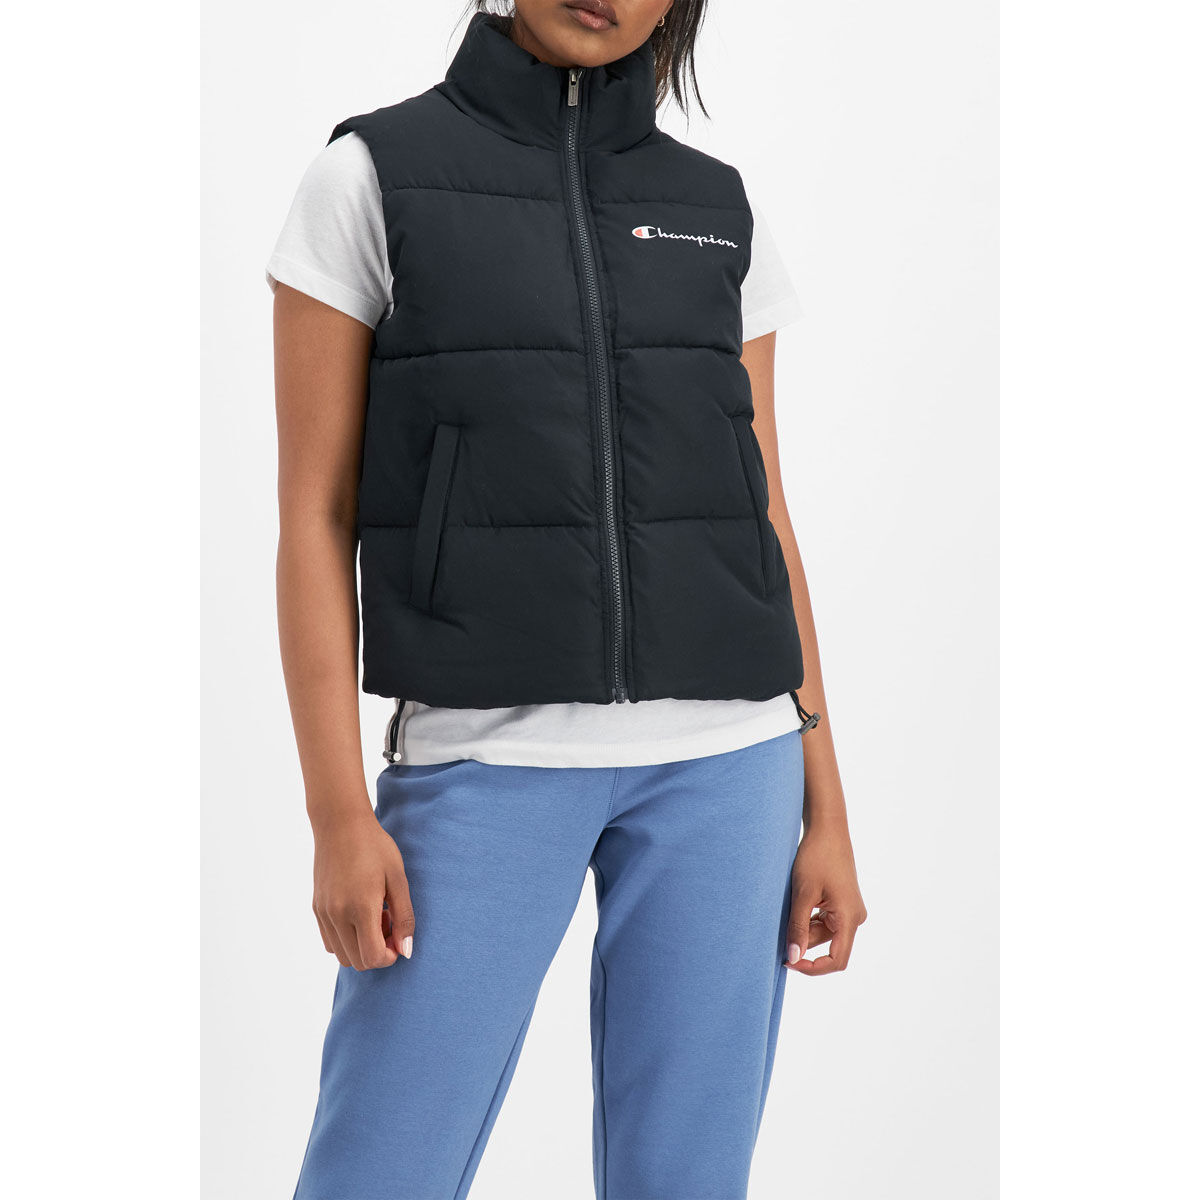 Shoppers Love This Cropped Puffer Vest From Amazon